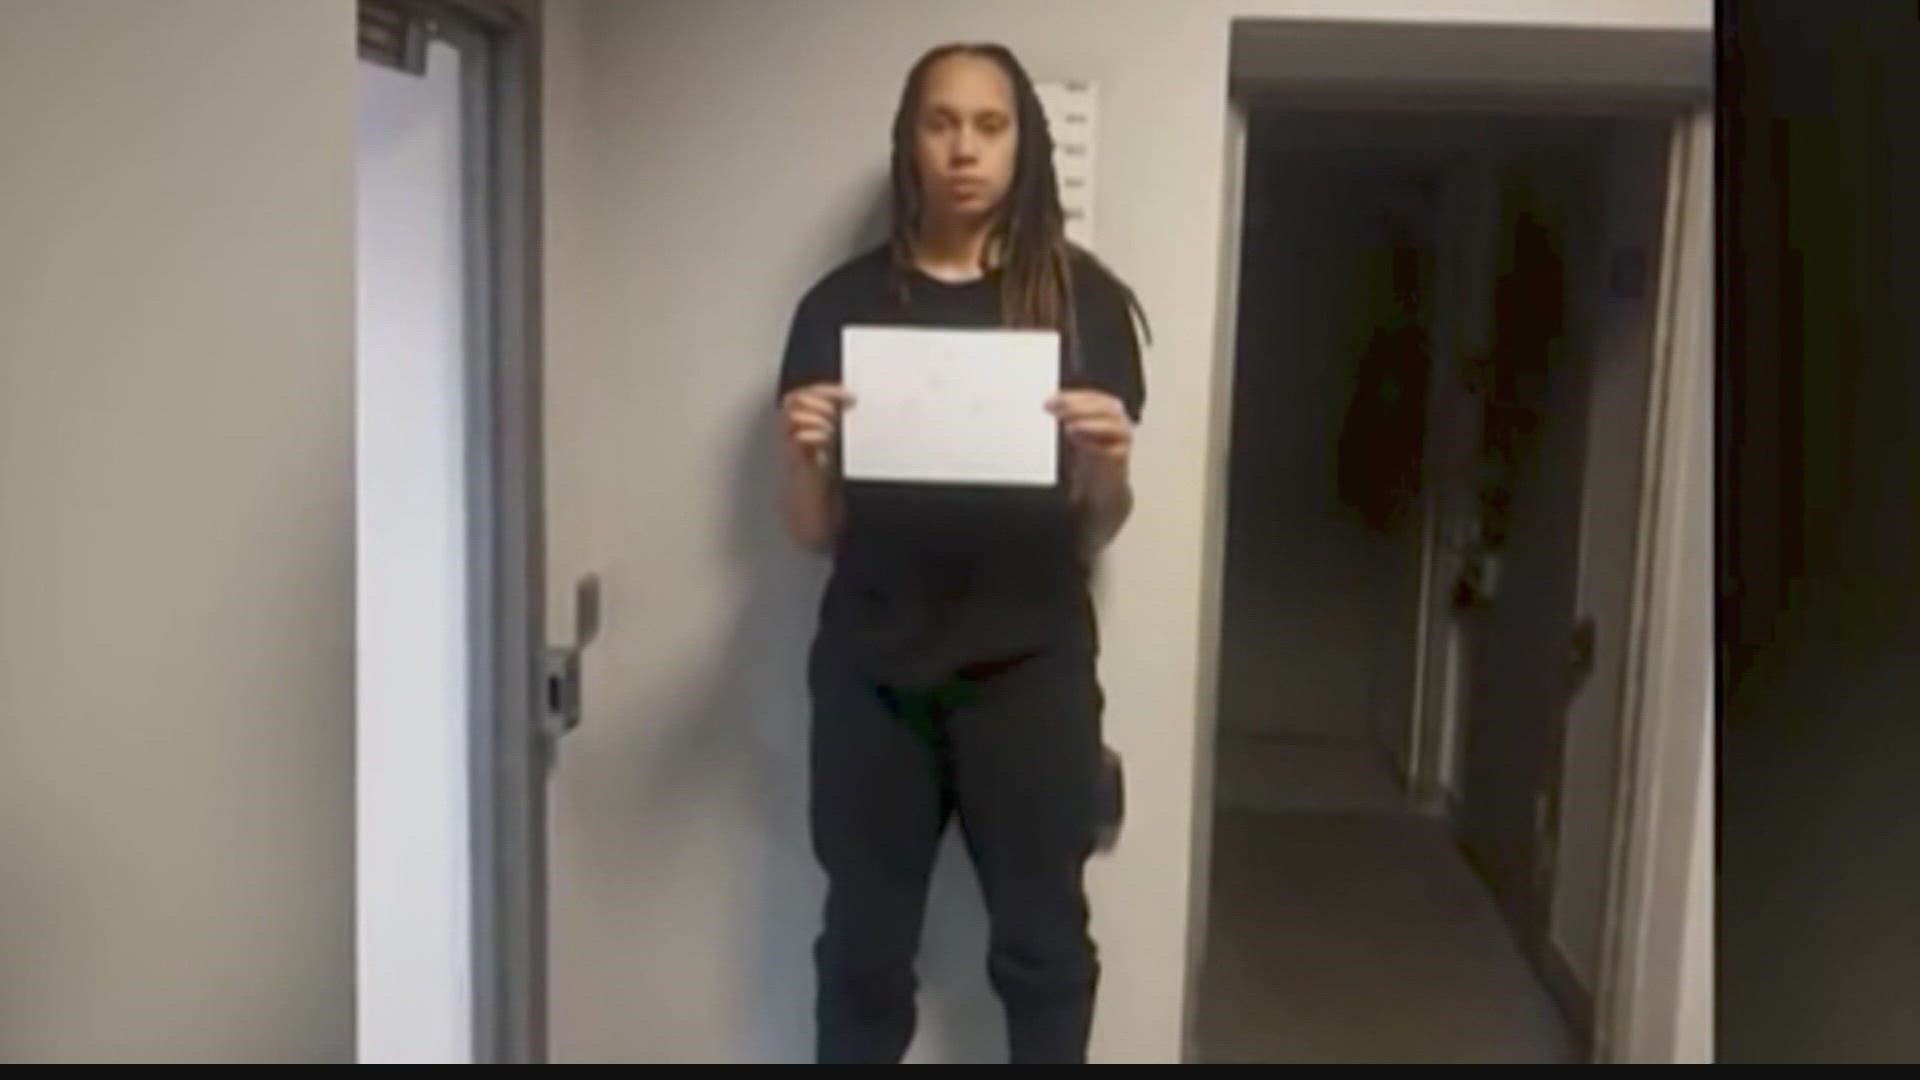 Nearly five months after being detained in a Moscow airport, WNBA star Brittney Griner pled guilty to drug charges. Legal experts weigh in on what's next.